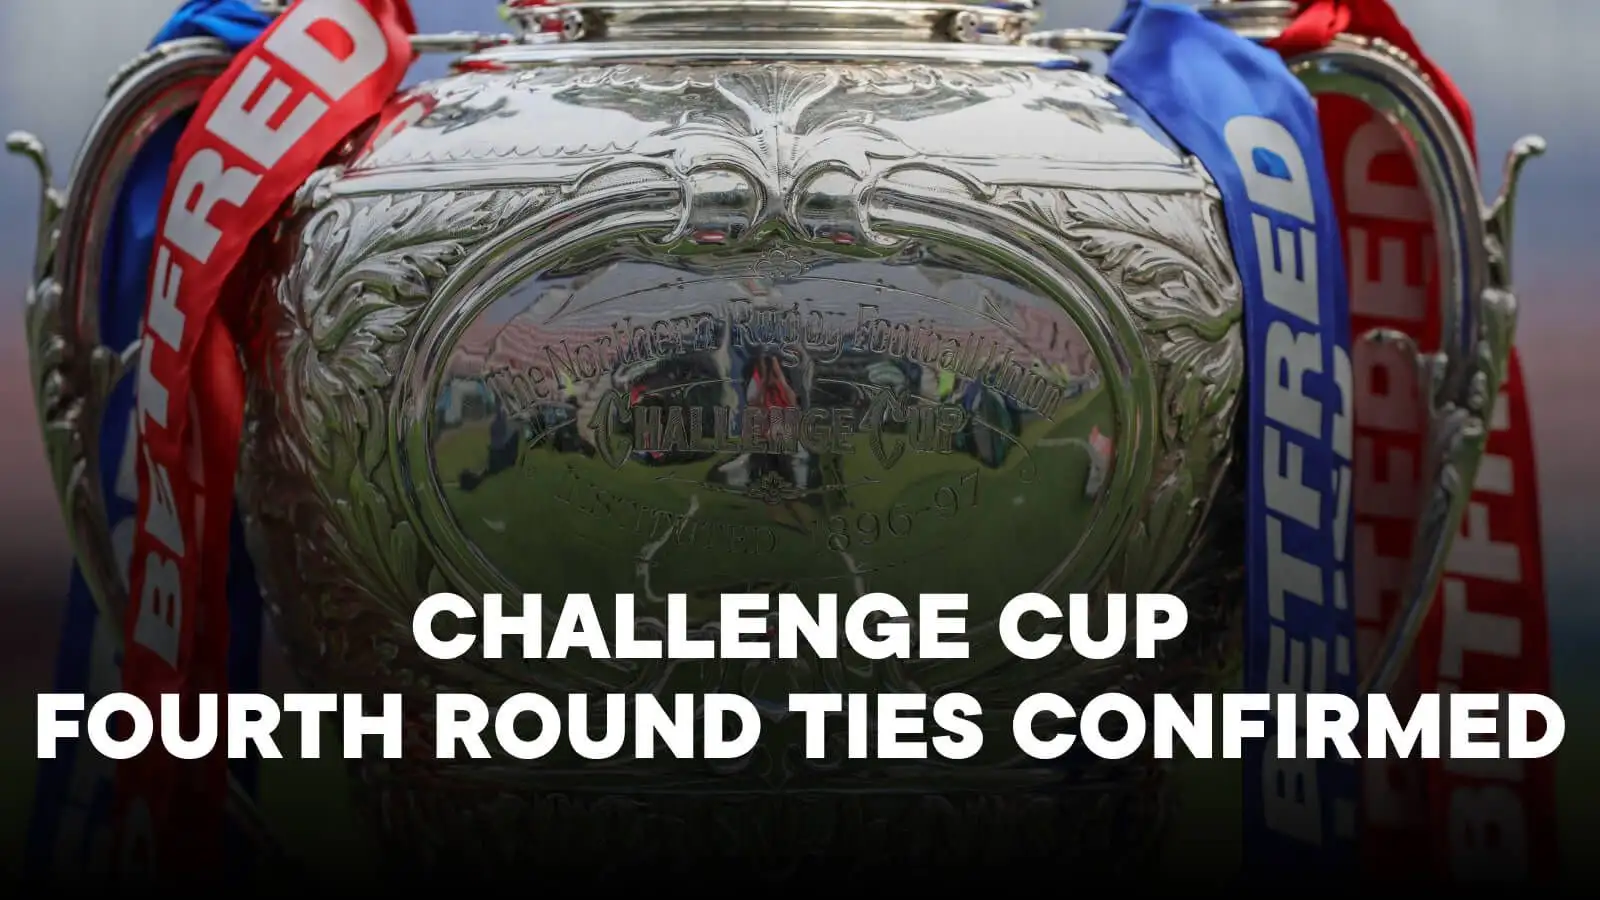 Challenge Cup fourth round ties confirmed as four community clubs reach the next stage